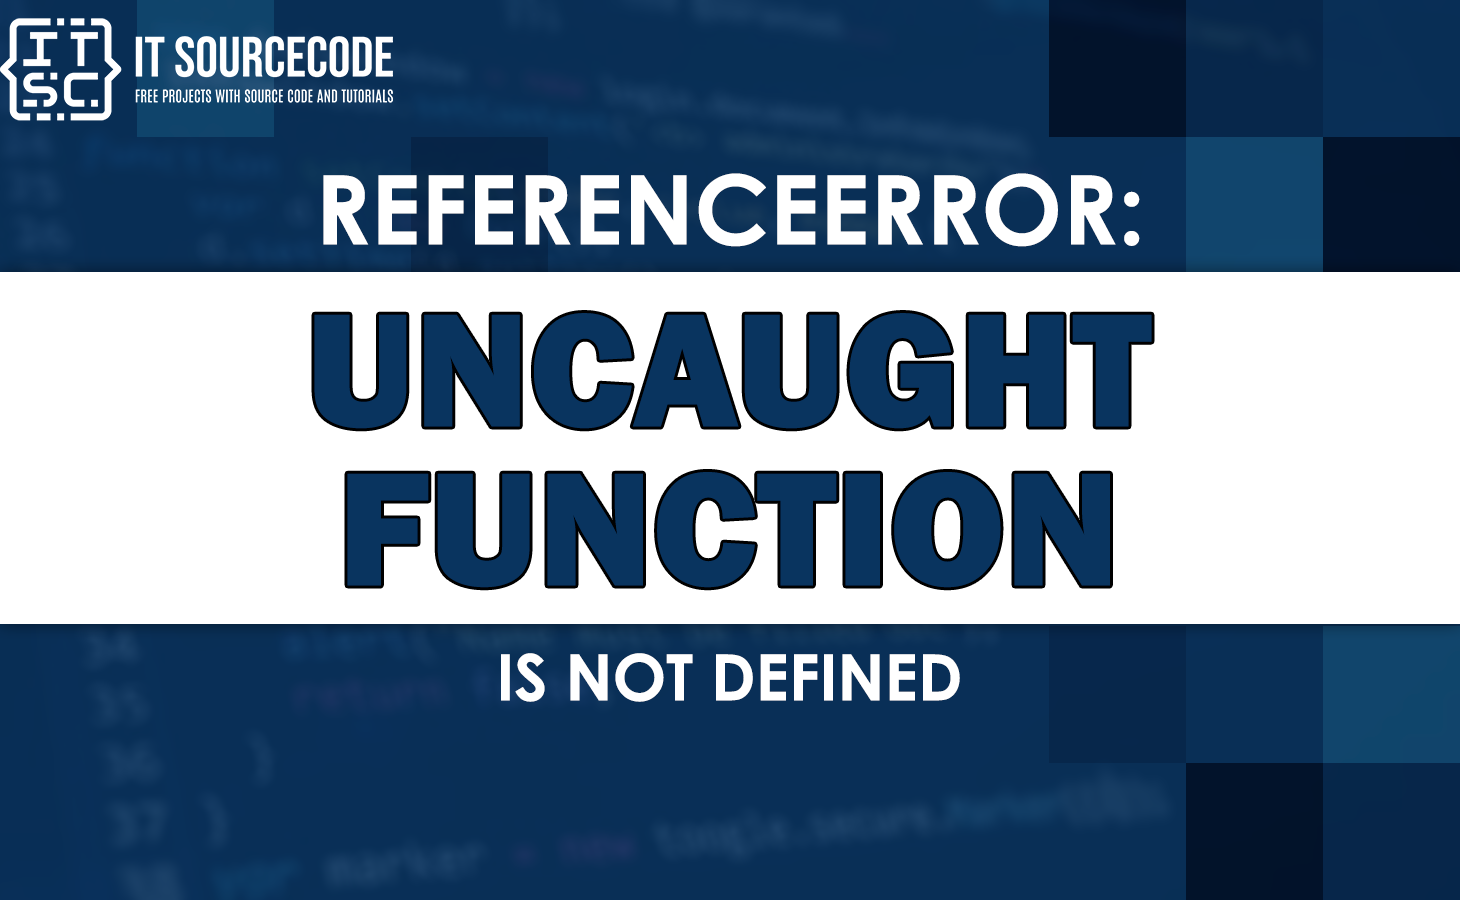 Uncaught referenceerror function is not defined